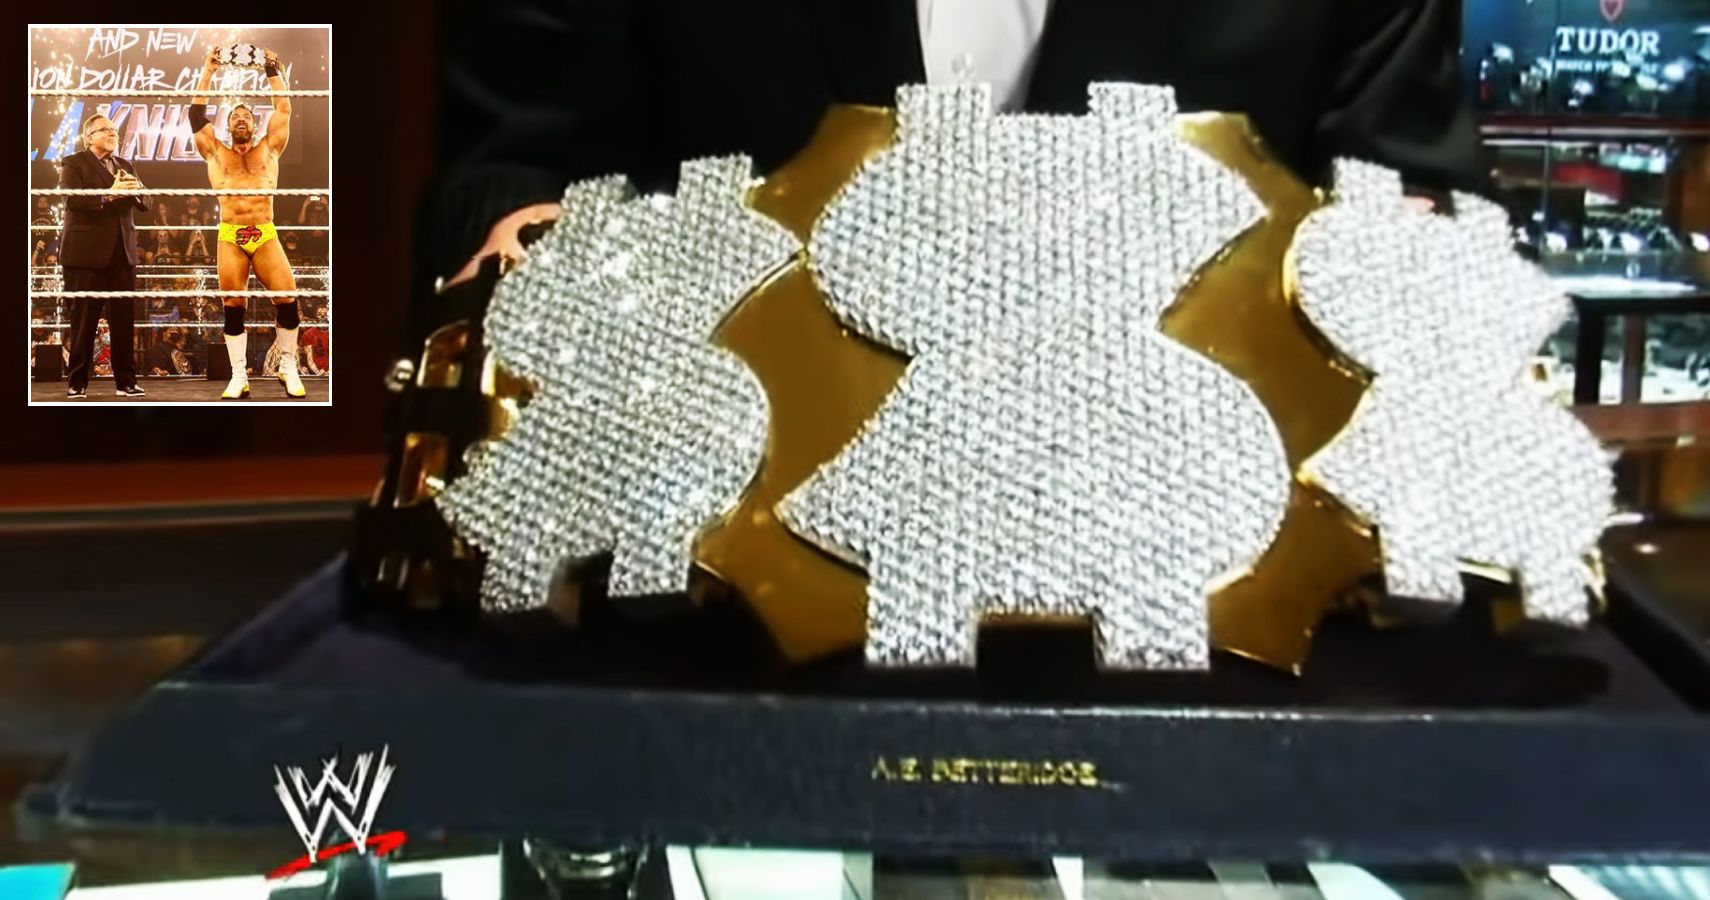 expensive belts with diamonds